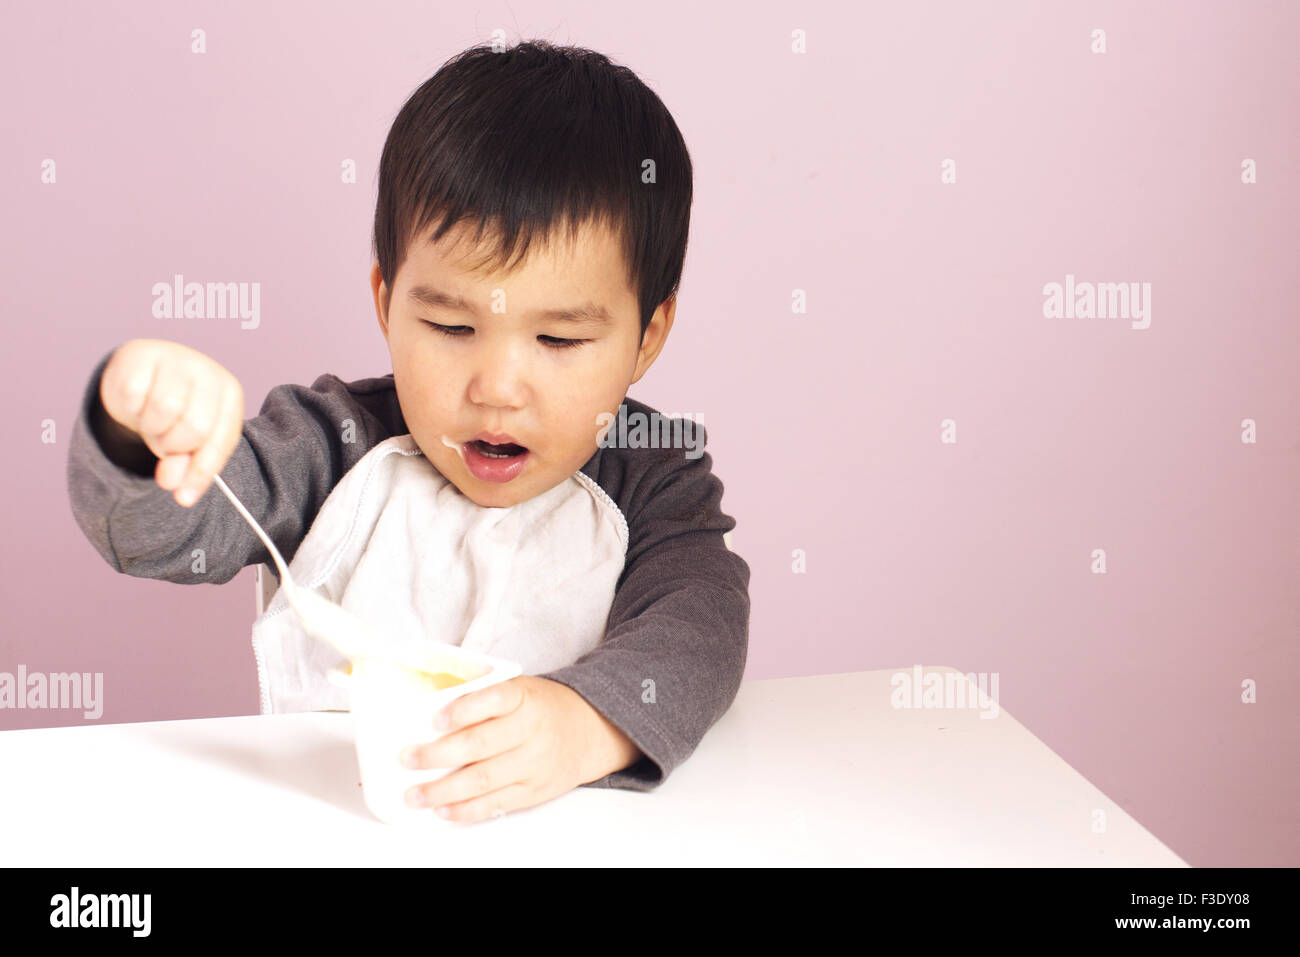 Baby feeding himself with a spoon Stock Photo